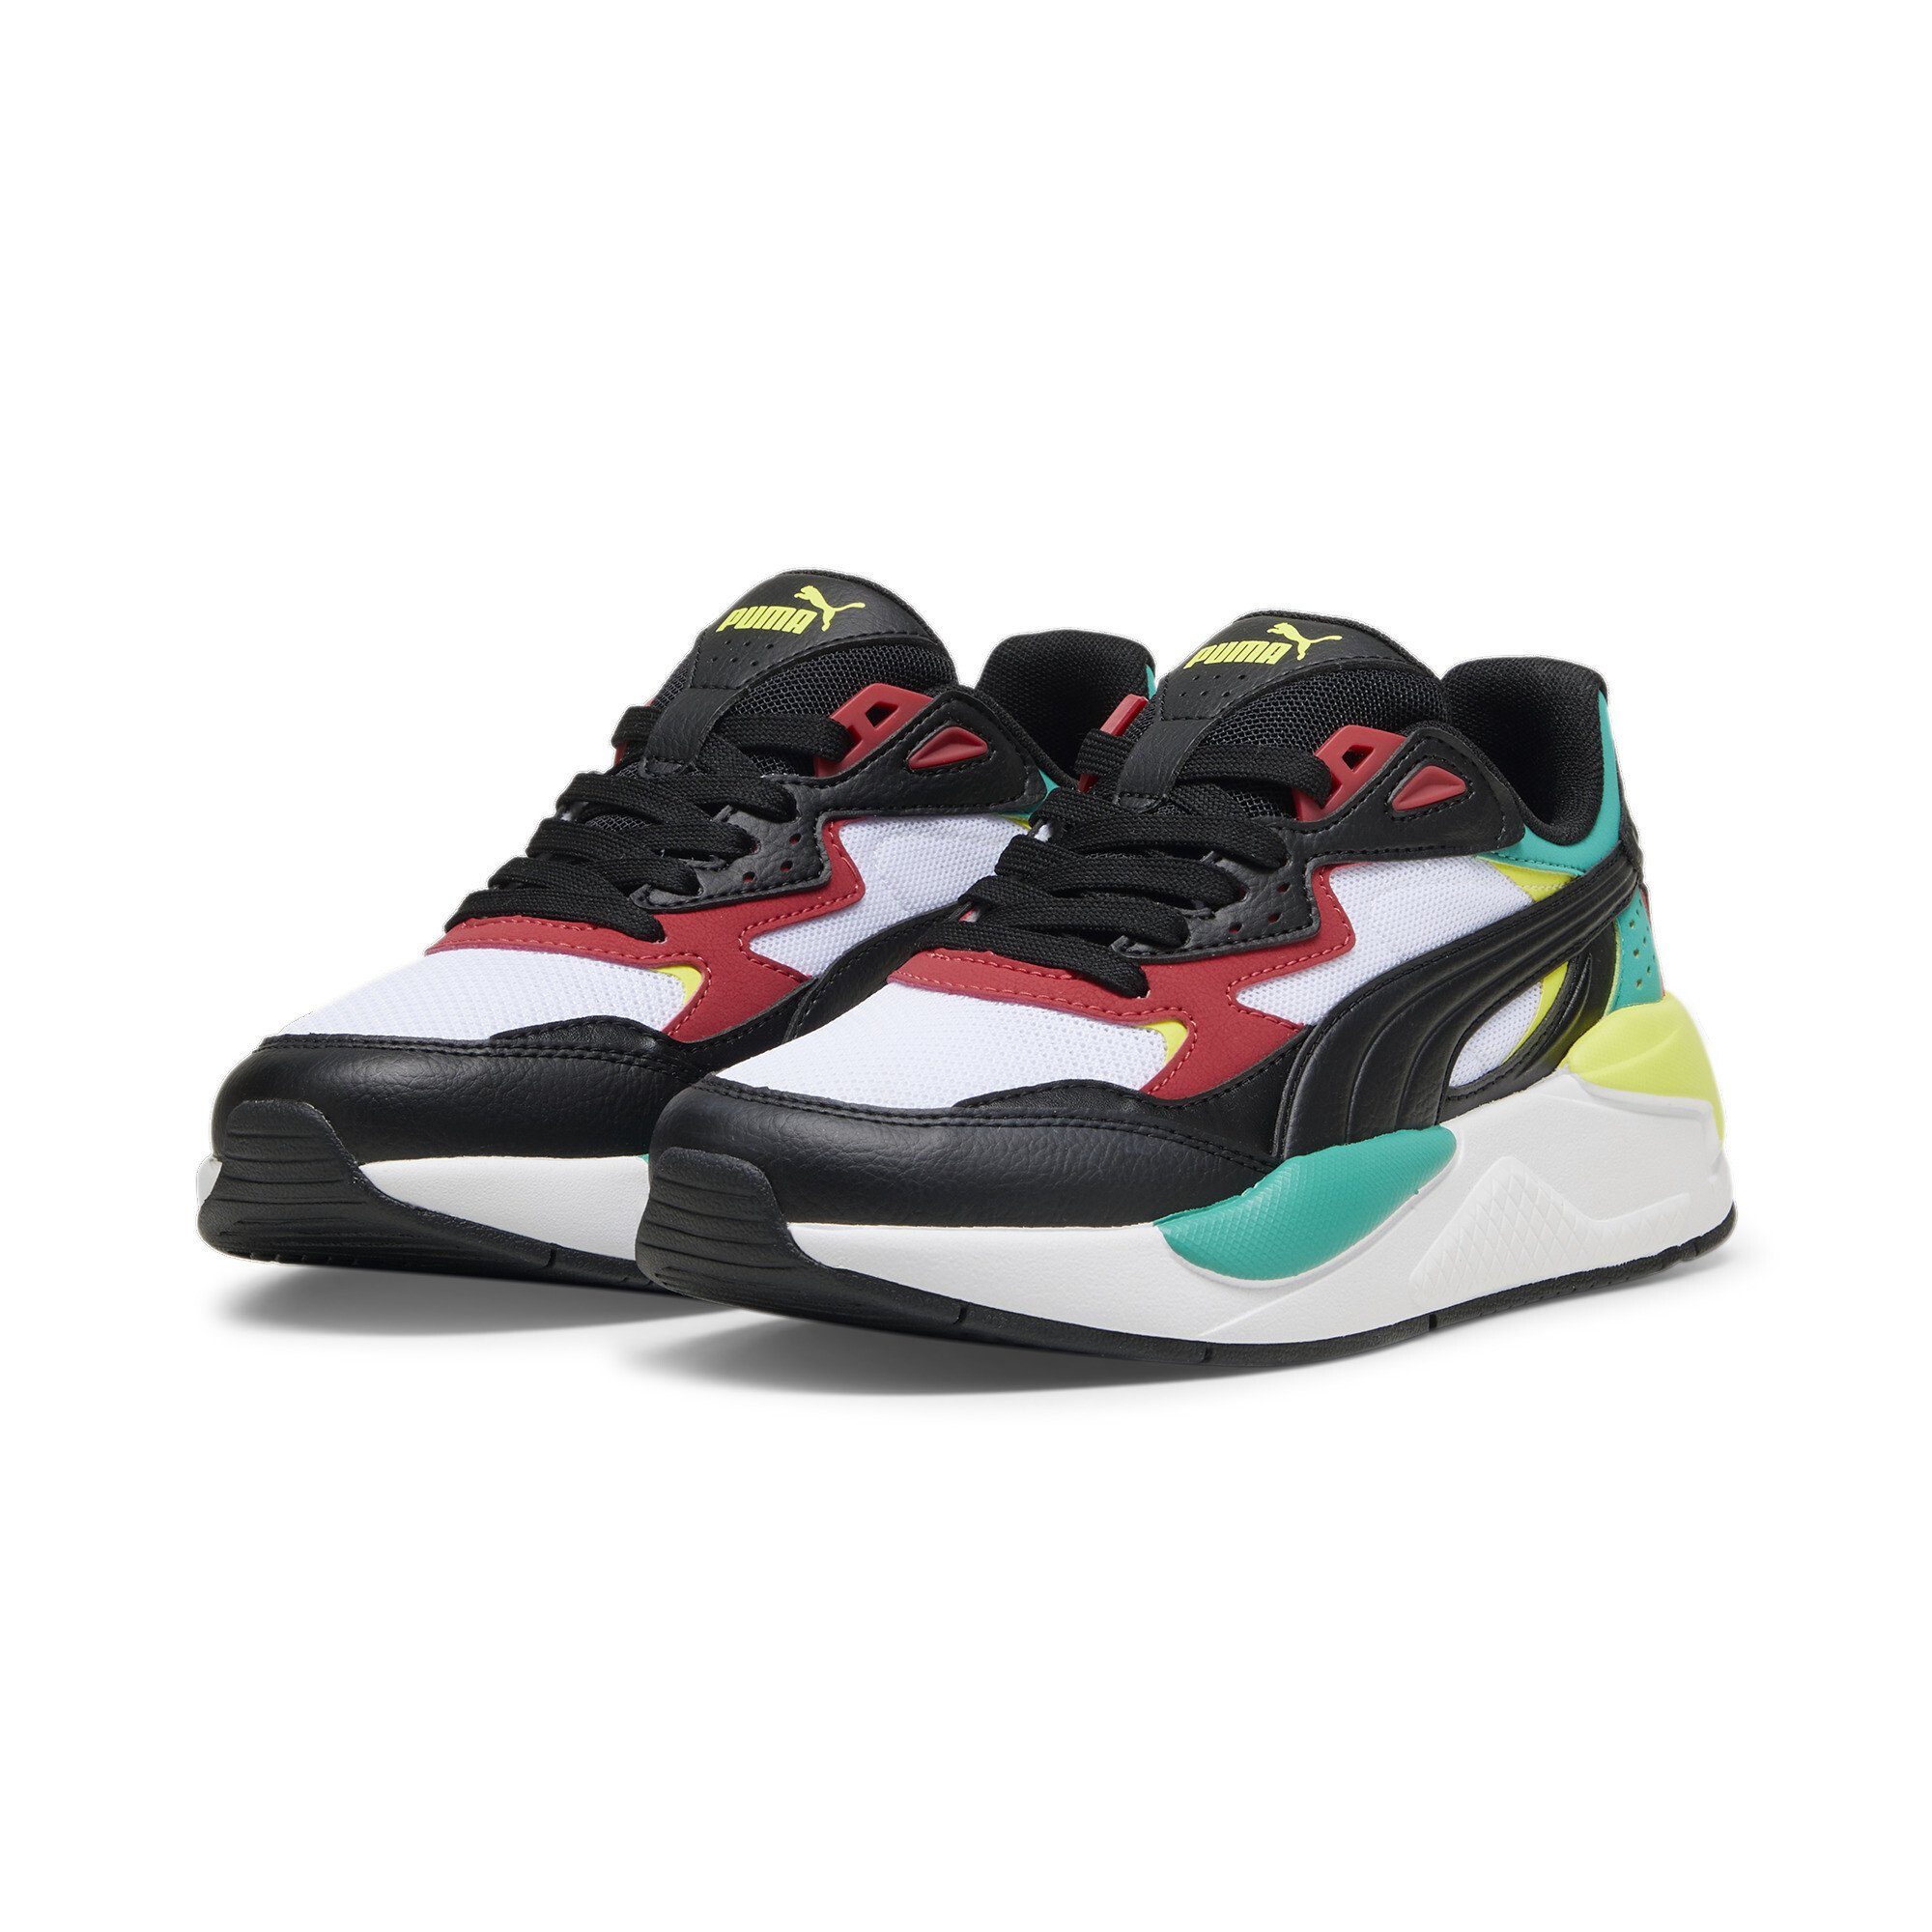 PUMA X-Ray Speed Sneakers Jugendliche Sneaker White Black Club Red Sparkling Green